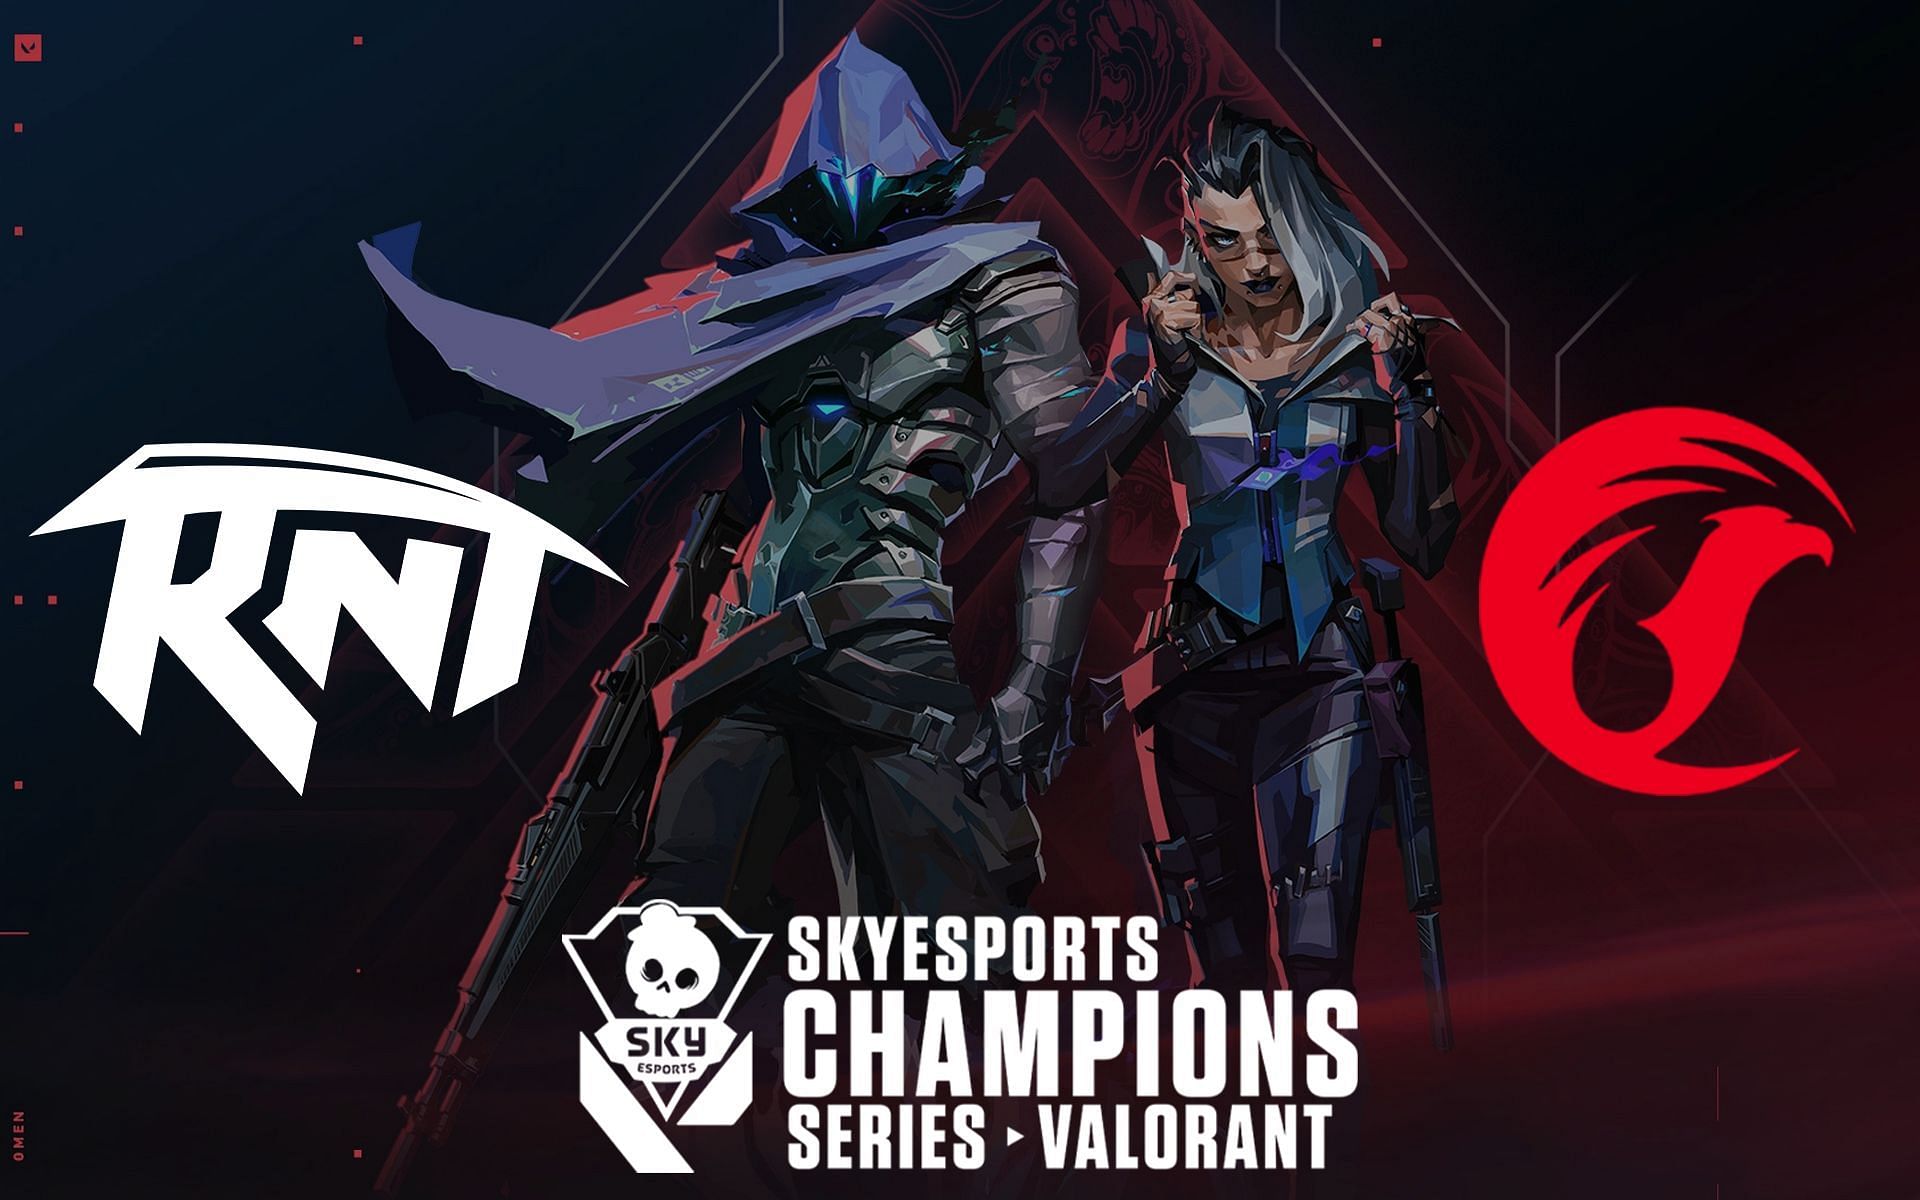 A detailed report on what happened at the AMD Skyesports Champion Series Valorant tournament&rsquo;s Day 3 (Image by Sportskeeda)